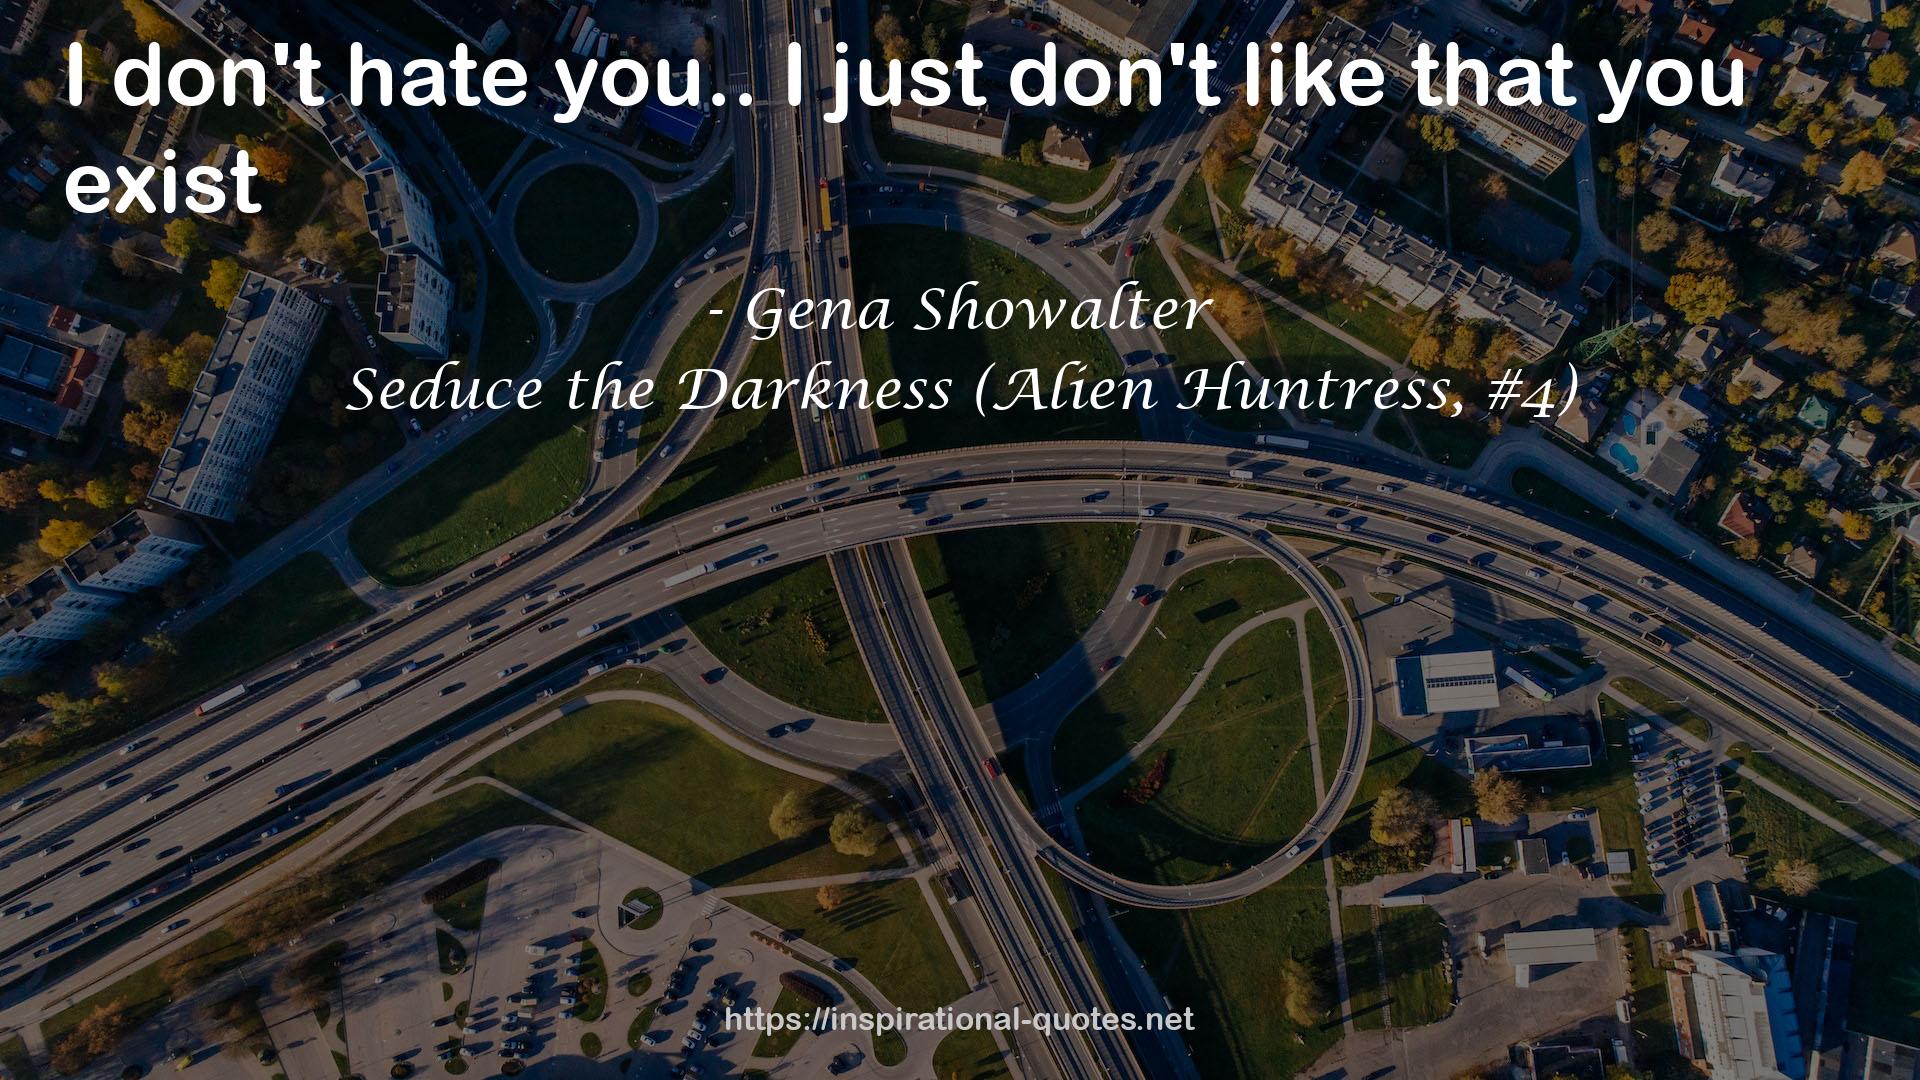 Seduce the Darkness (Alien Huntress, #4) QUOTES